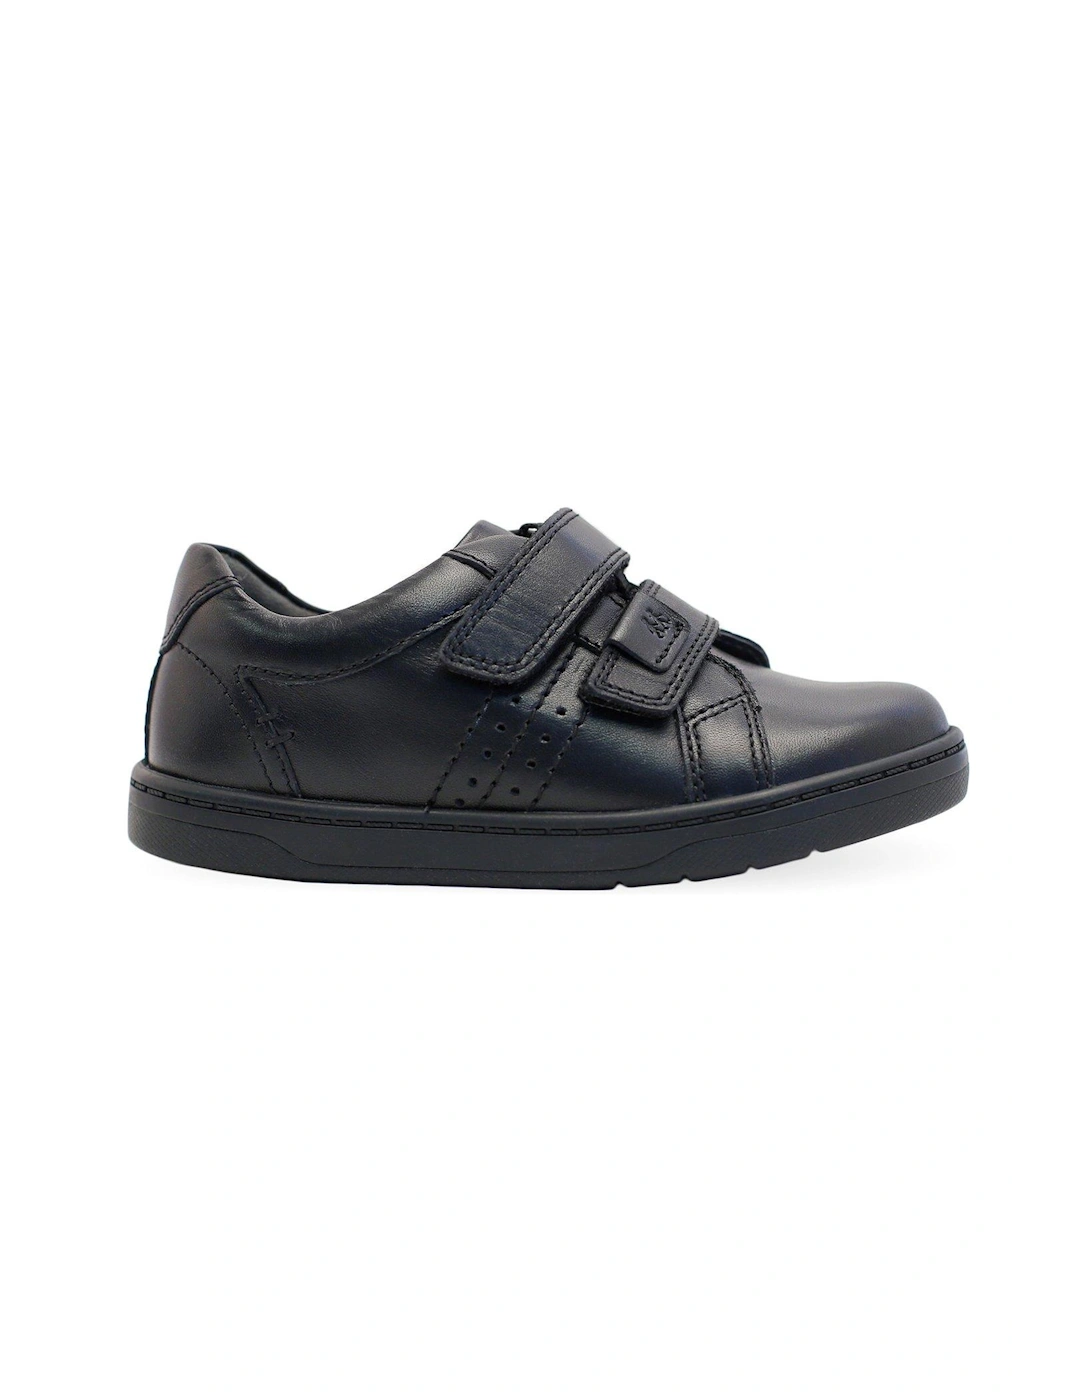 Explore Black Leather Trainer Style Boys School Shoes, 2 of 1